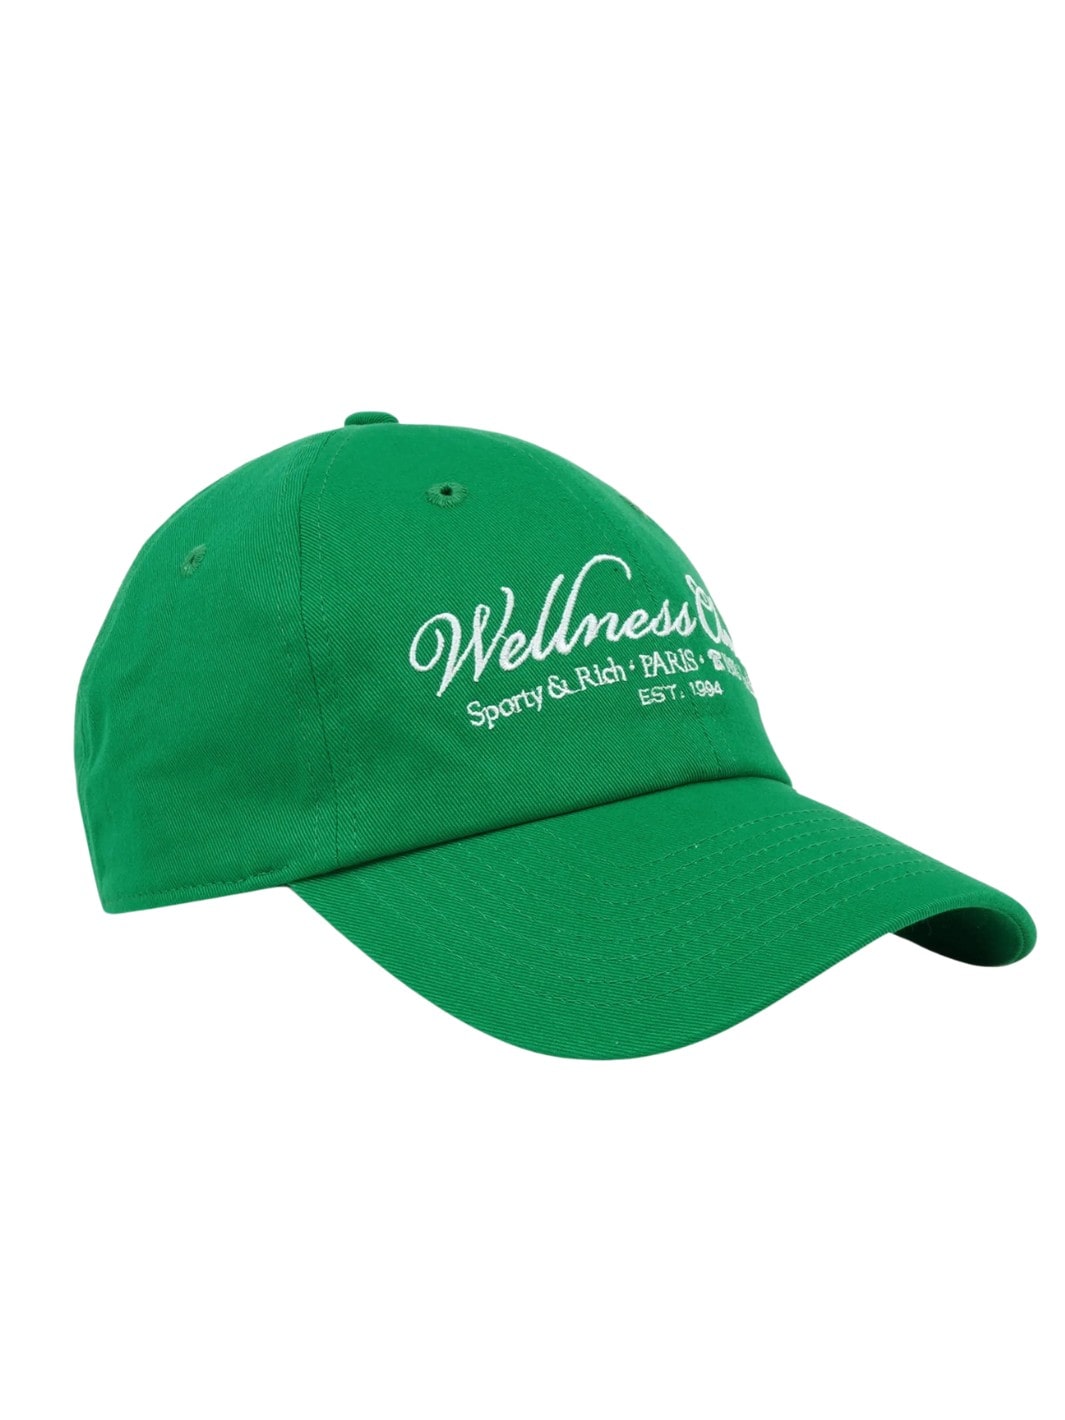 Sporty & Rich Accessories Cap | 1800 Health Embroided Hat Verde/White